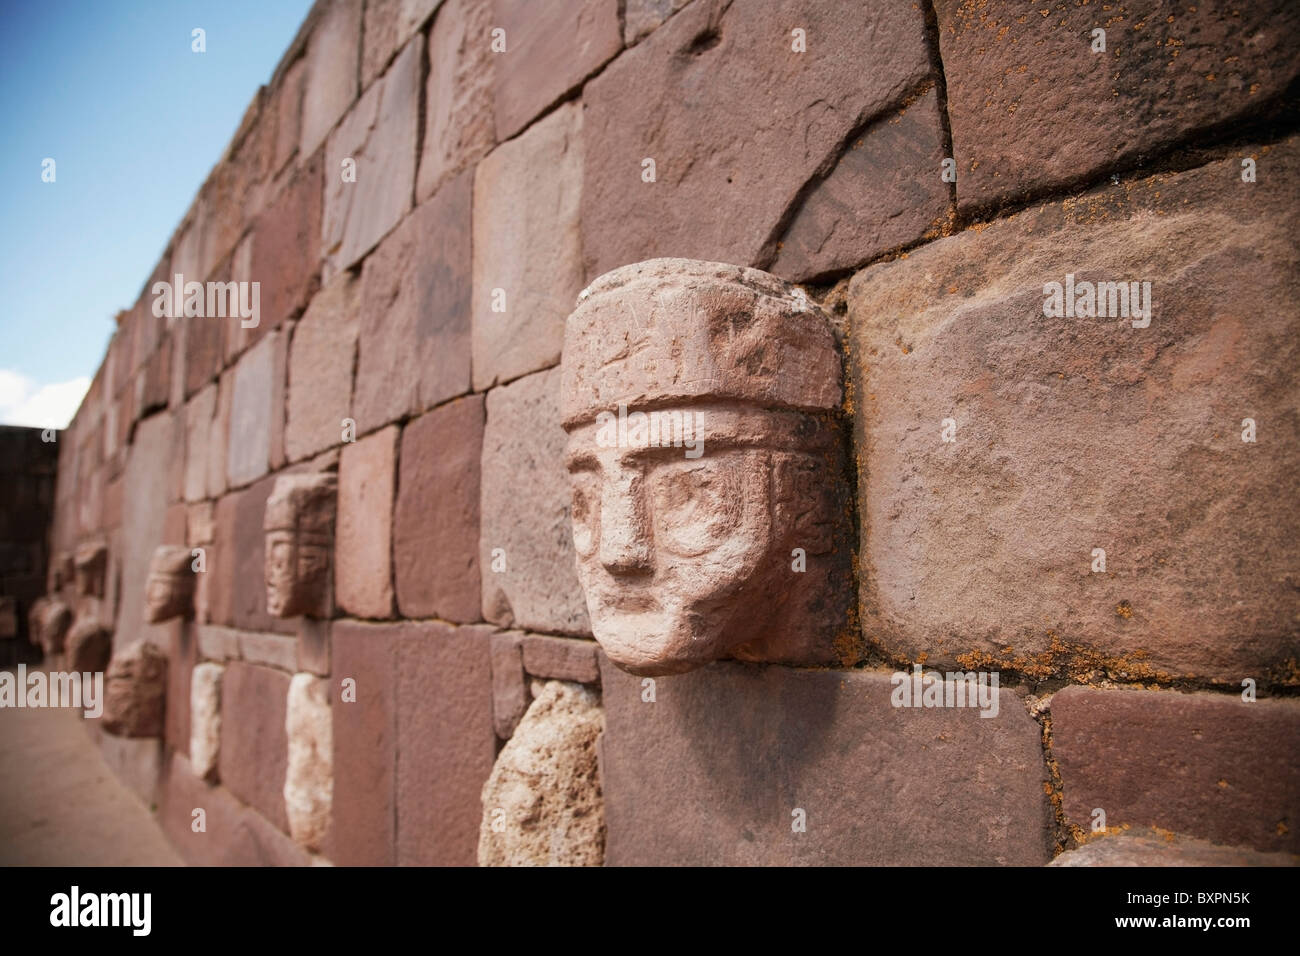 Carved Stone Heads In Ruins Stock Photo